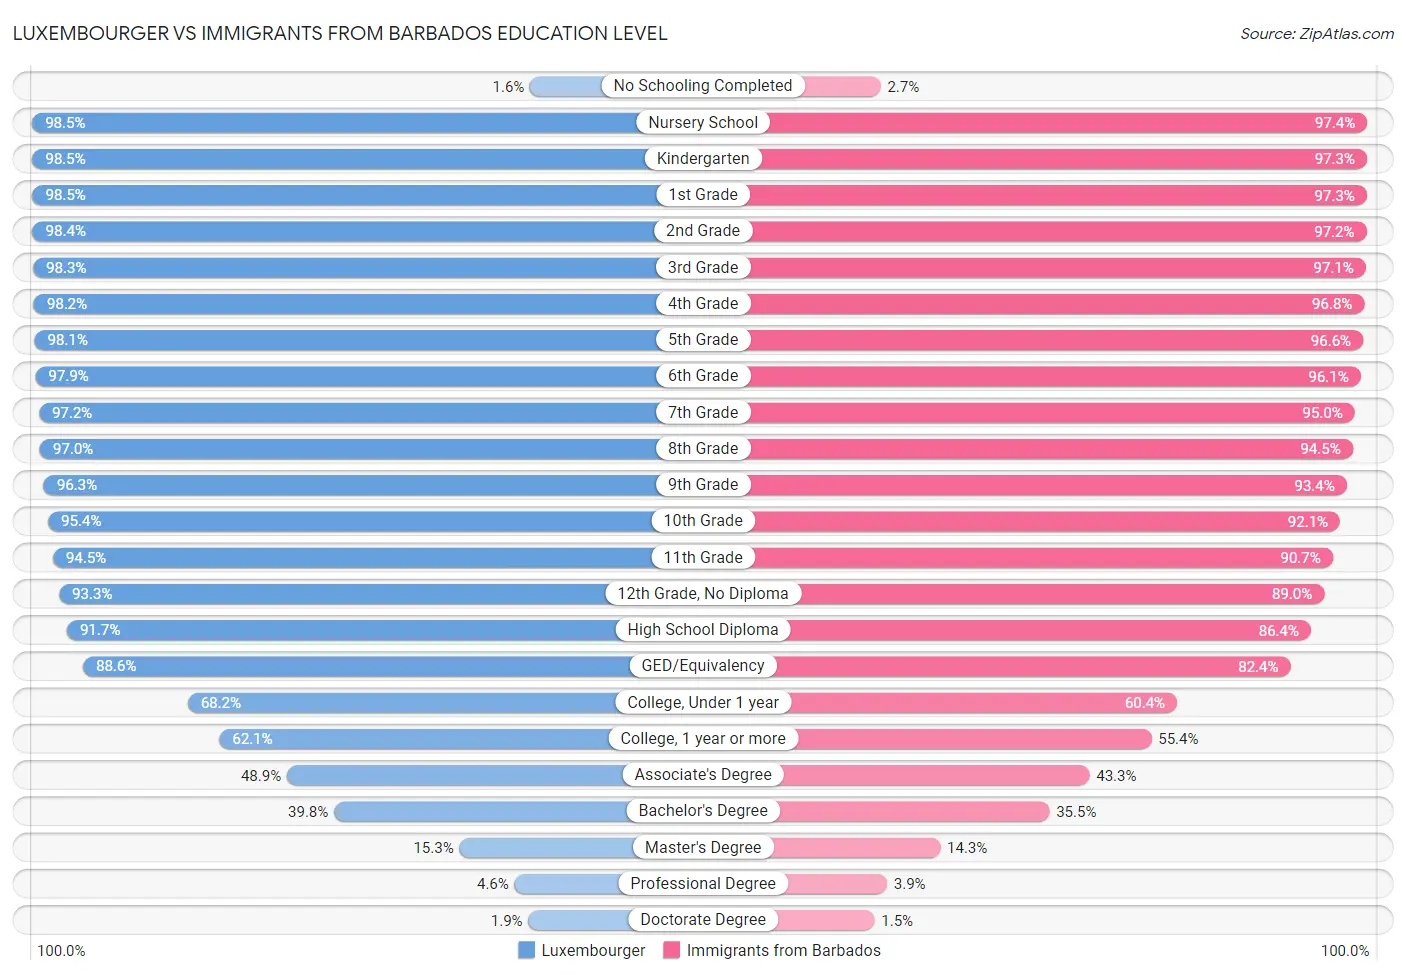 Luxembourger vs Immigrants from Barbados Education Level